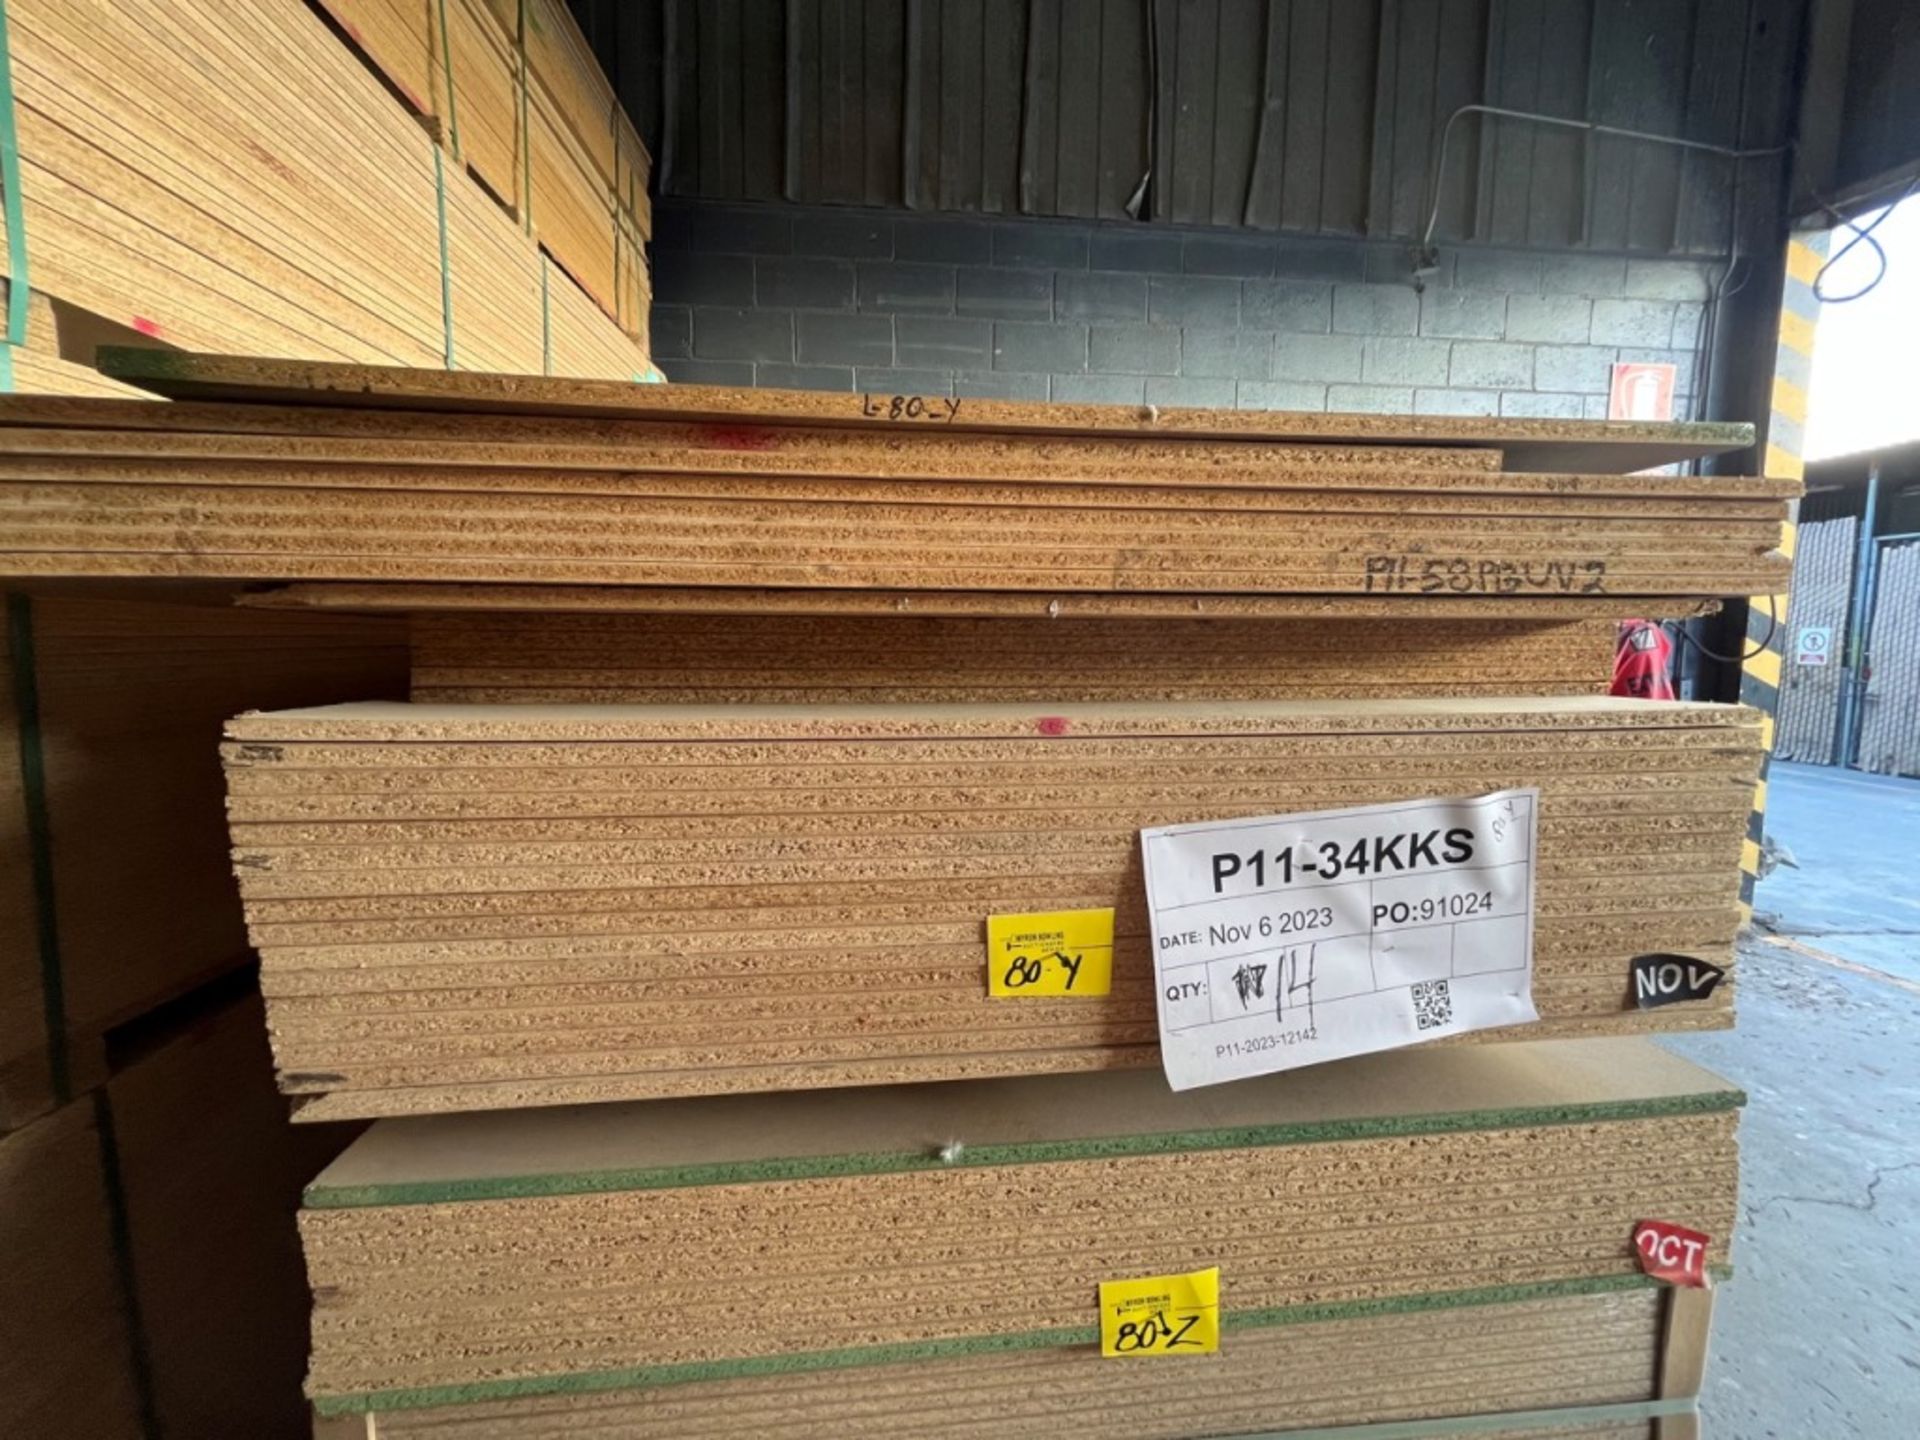 Lot of 53 pieces of compressed wood contains: 33 pieces in 3/4 PB0508 material measuring 4 x 8 ft; - Image 4 of 10